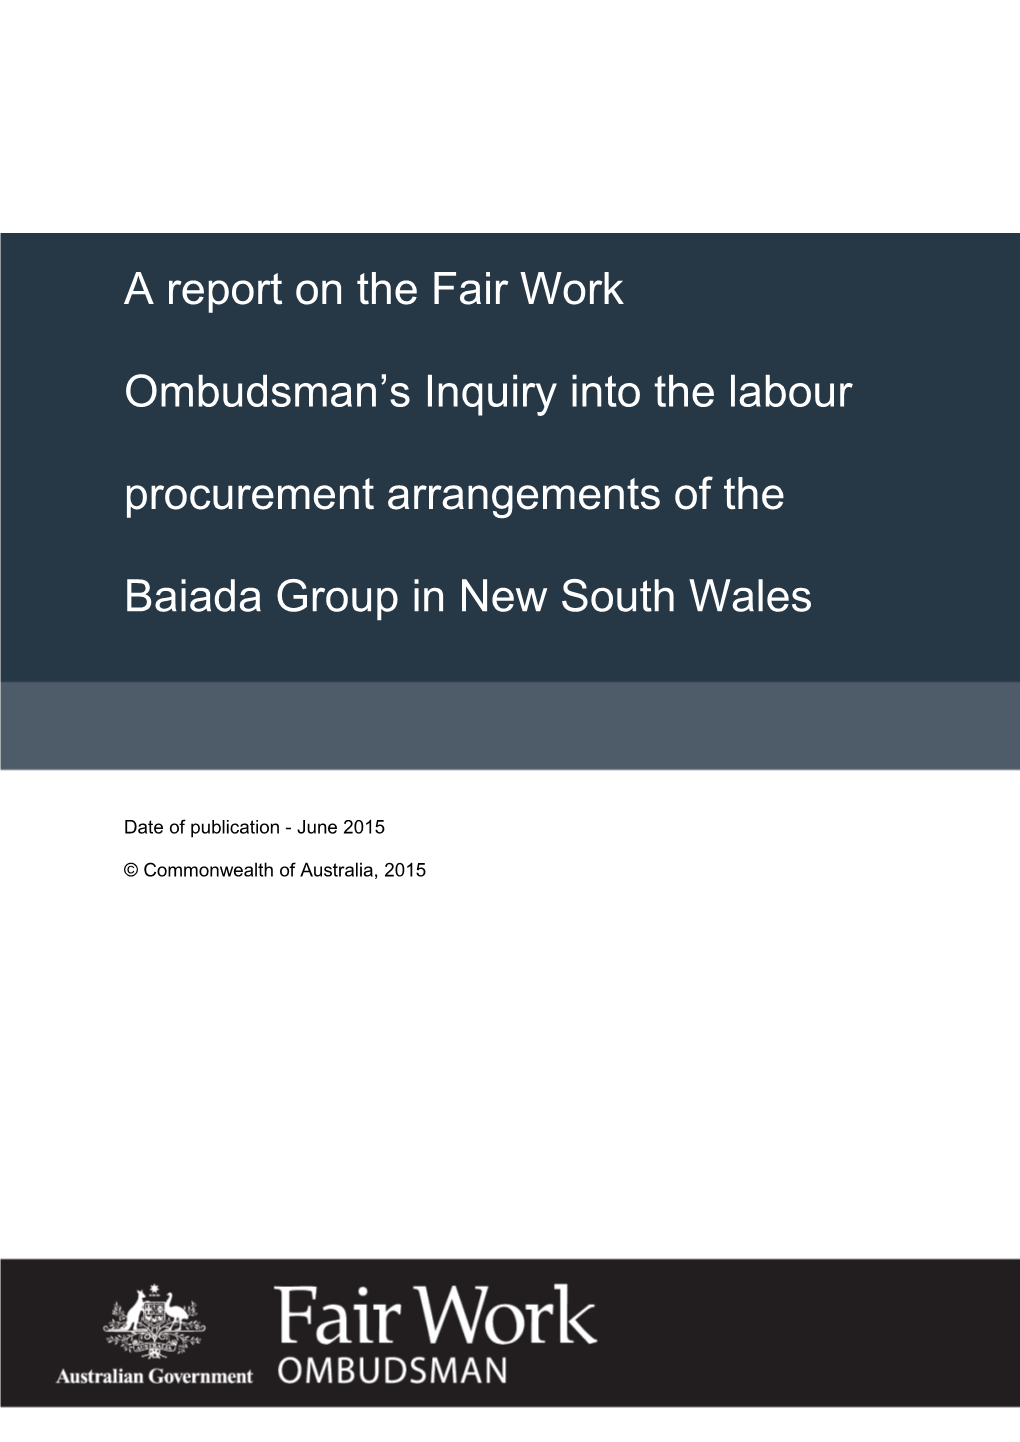 A Report on the Fair Work Ombudsman's Inquiry Into The